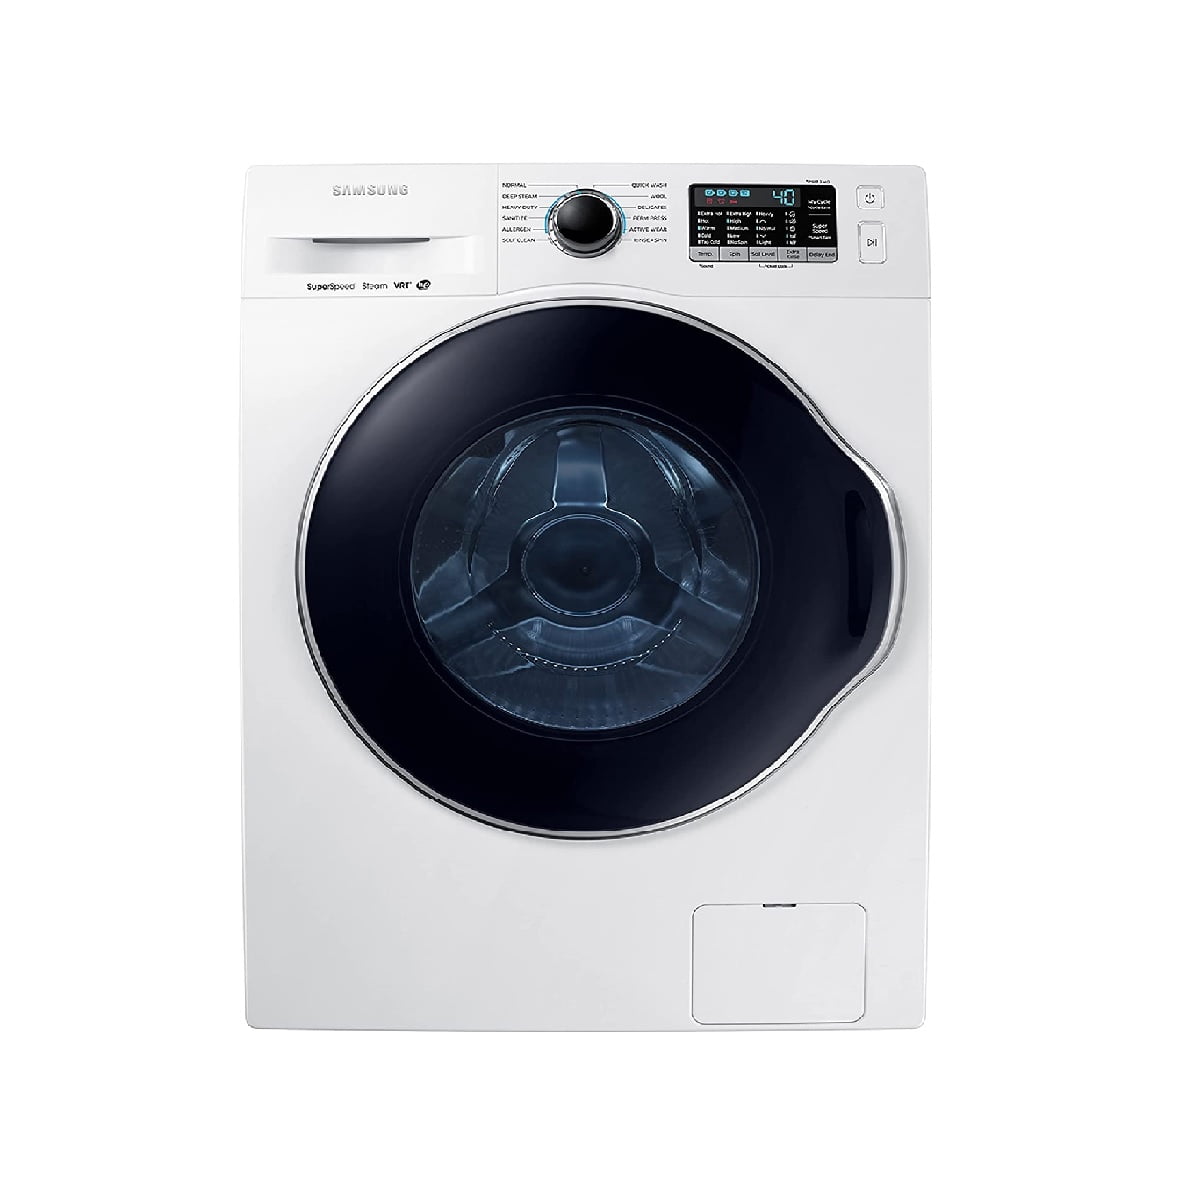 Samsung washer humming but not spinning